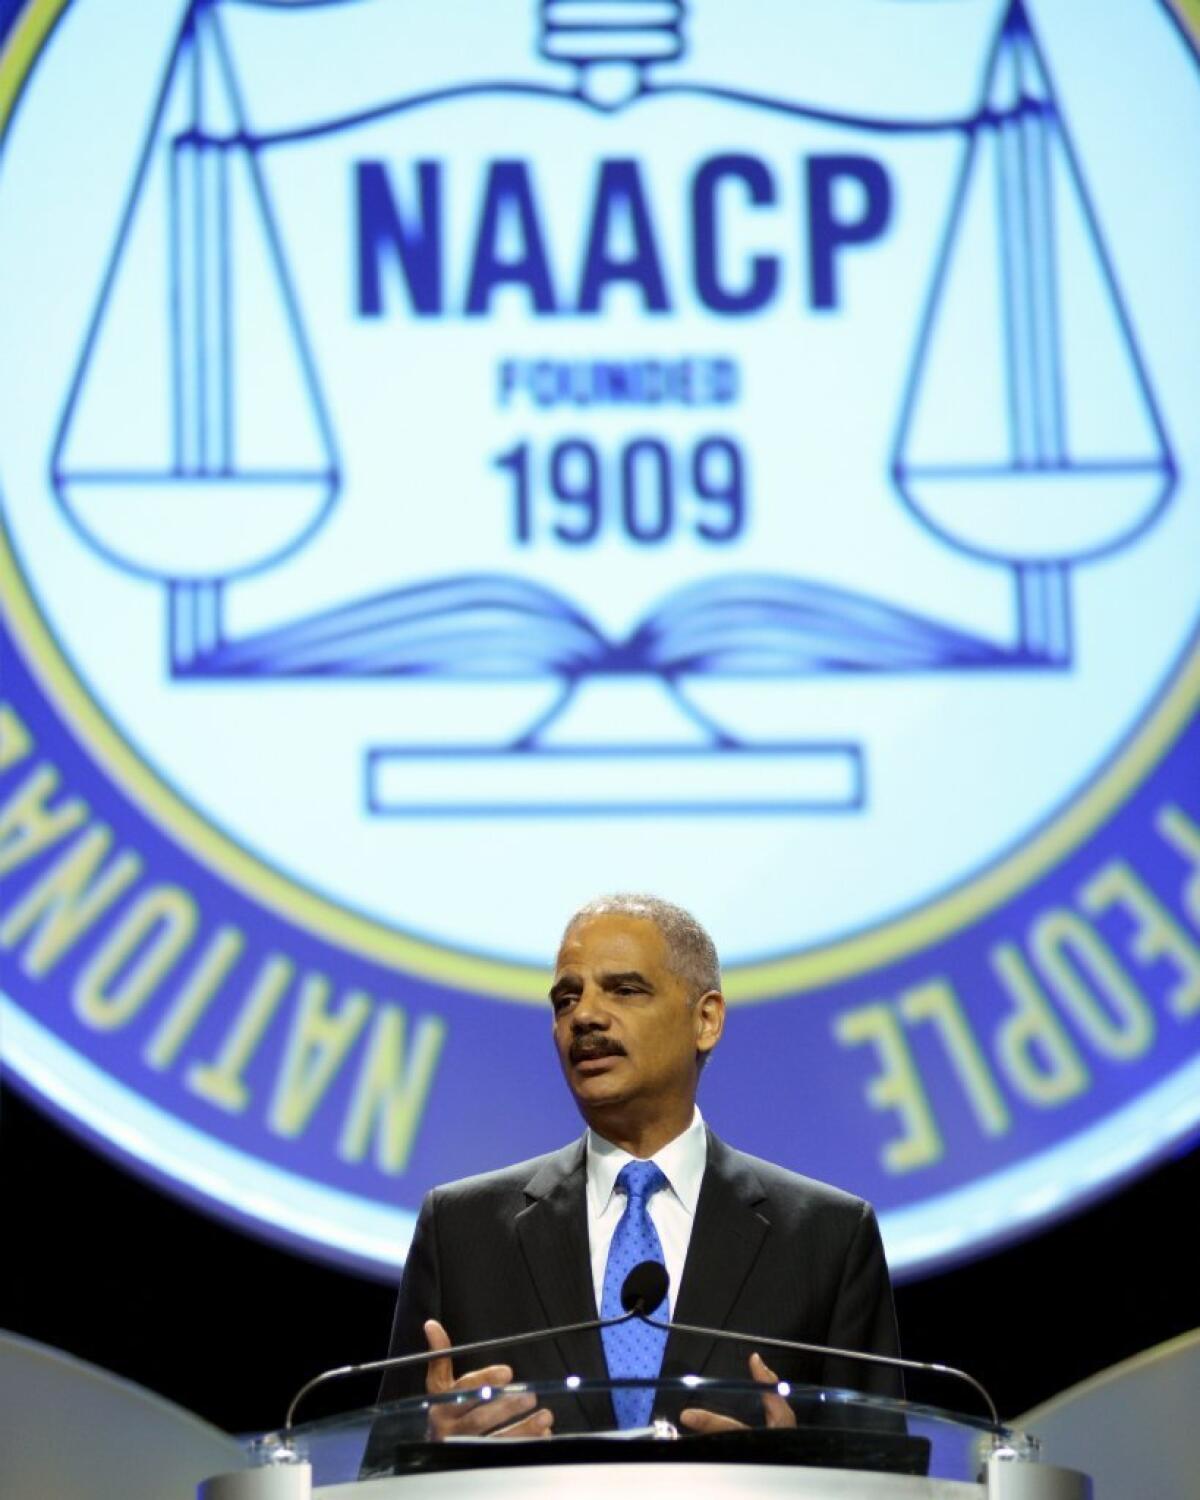 Atty. Gen. Eric H. Holder Jr. speaks to the National Convention of the NAACP on Tuesday in Orlando, Fla. Holder condemned "stand your ground" laws and discussed the George Zimmerman not-guilty verdict in the shooting death of Trayvon Martin.